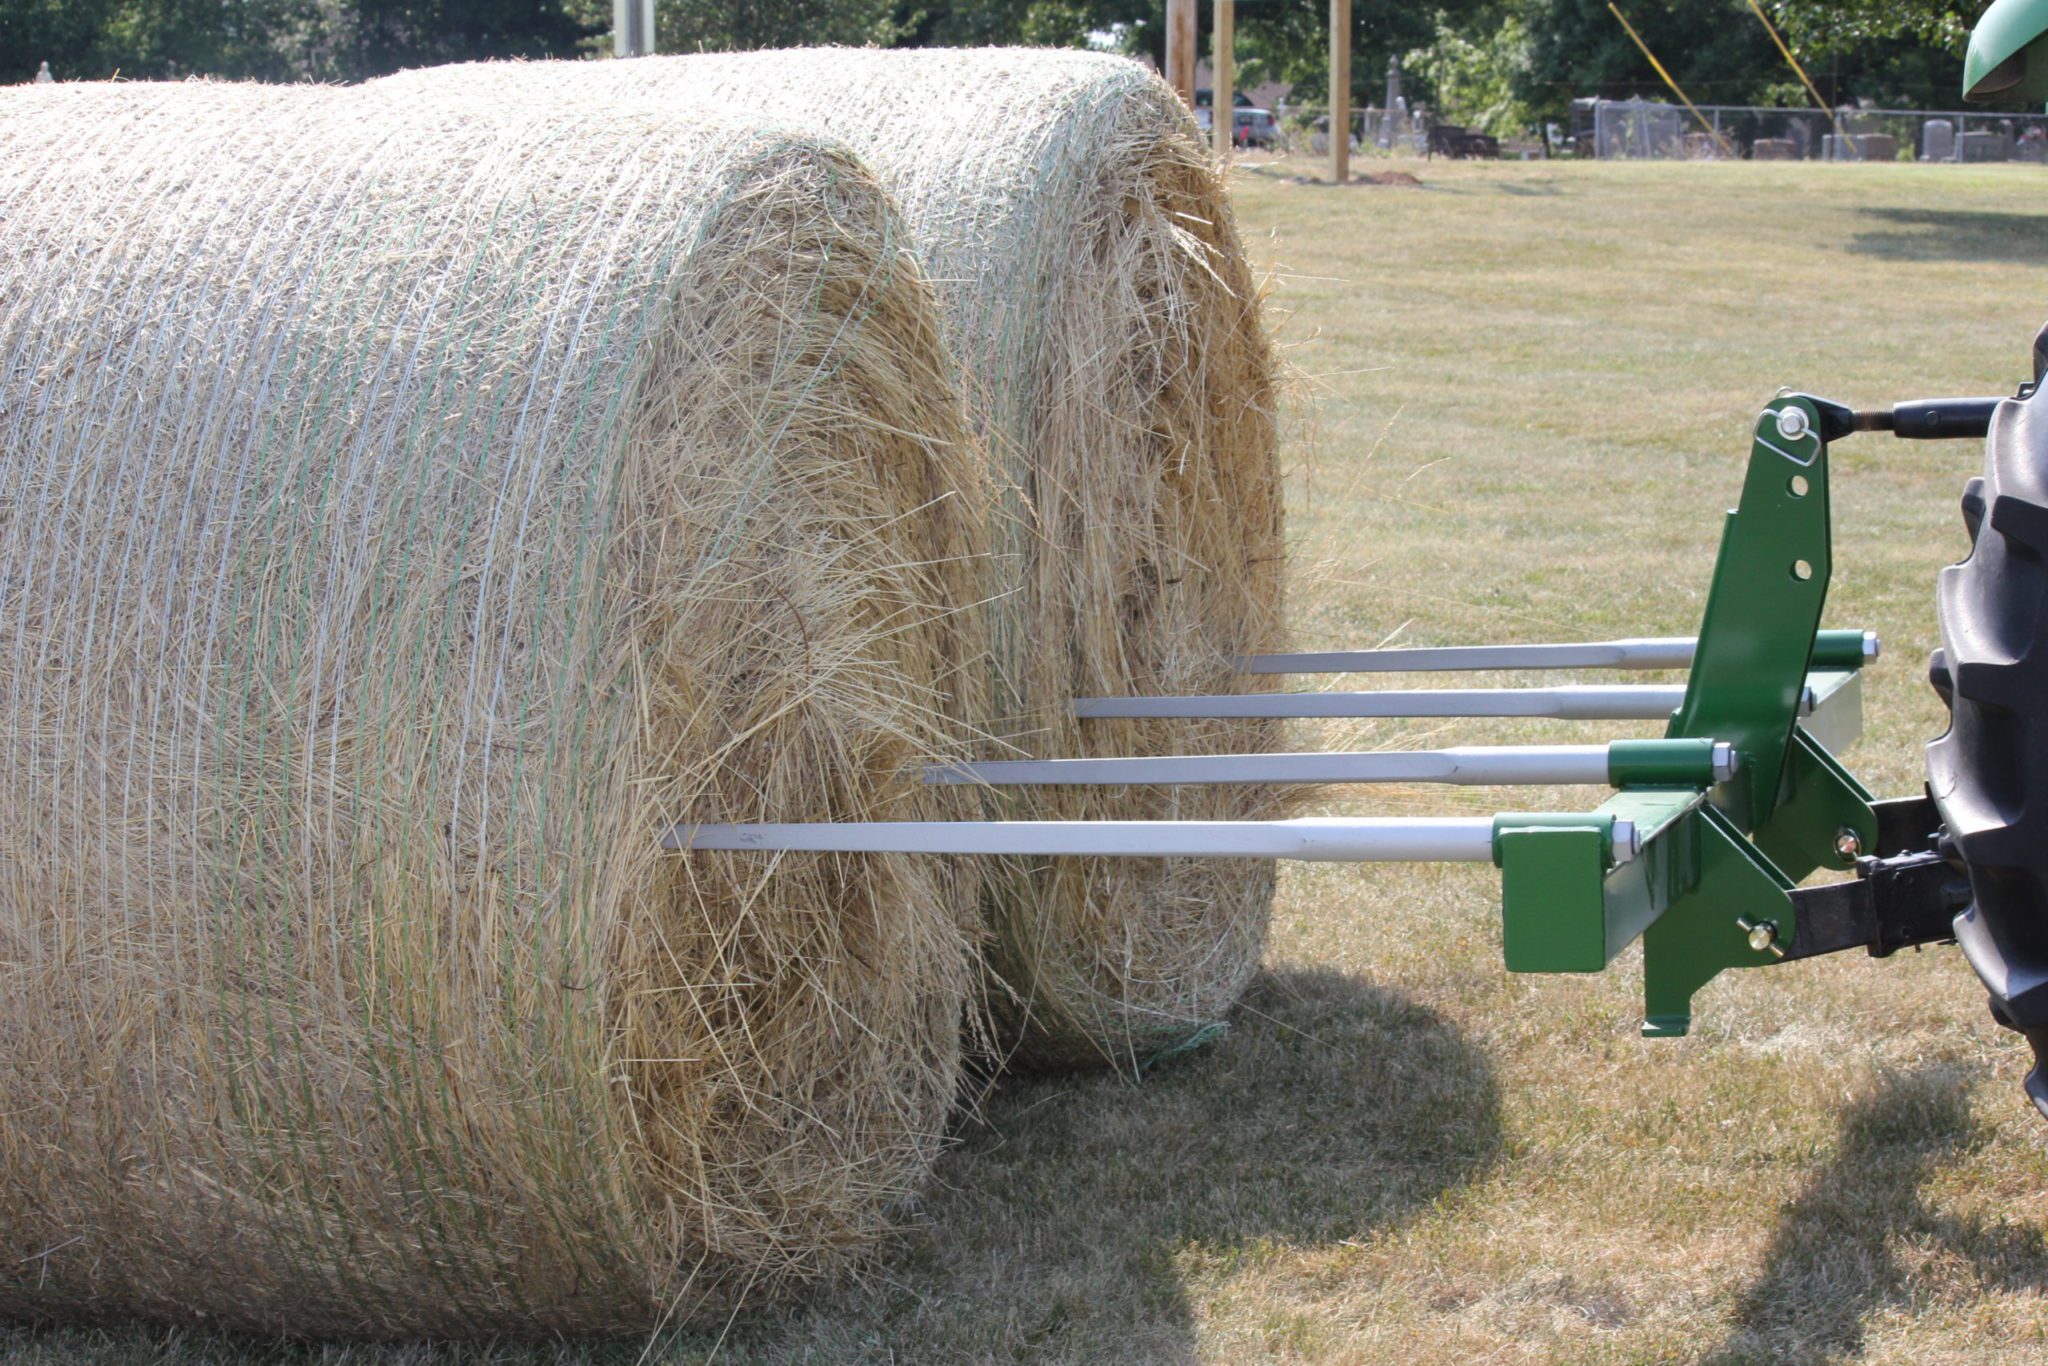 3-Point Two-Bale Mover piercing two big bales